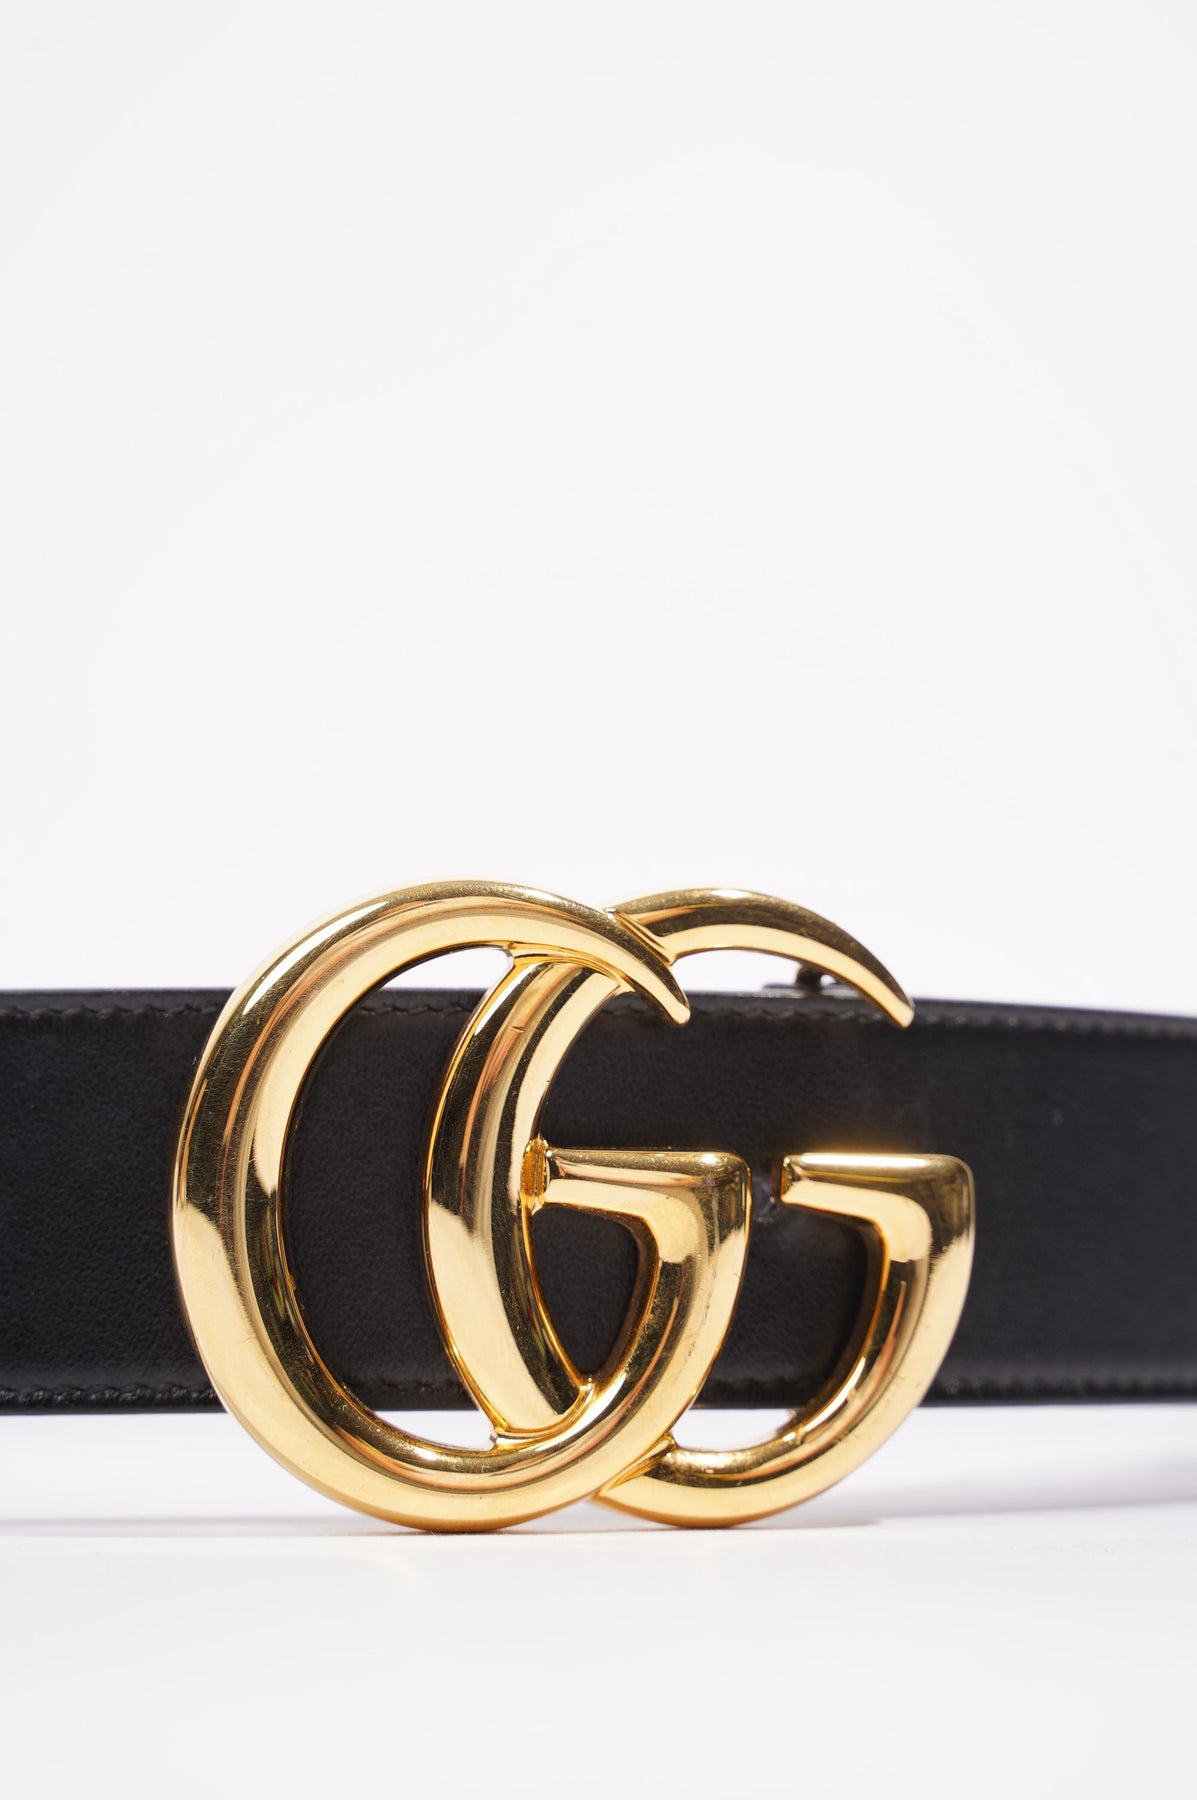 Gucci GG Marmont Leather Belt with Shiny Buckle, Size Gucci 80, Black, Leather